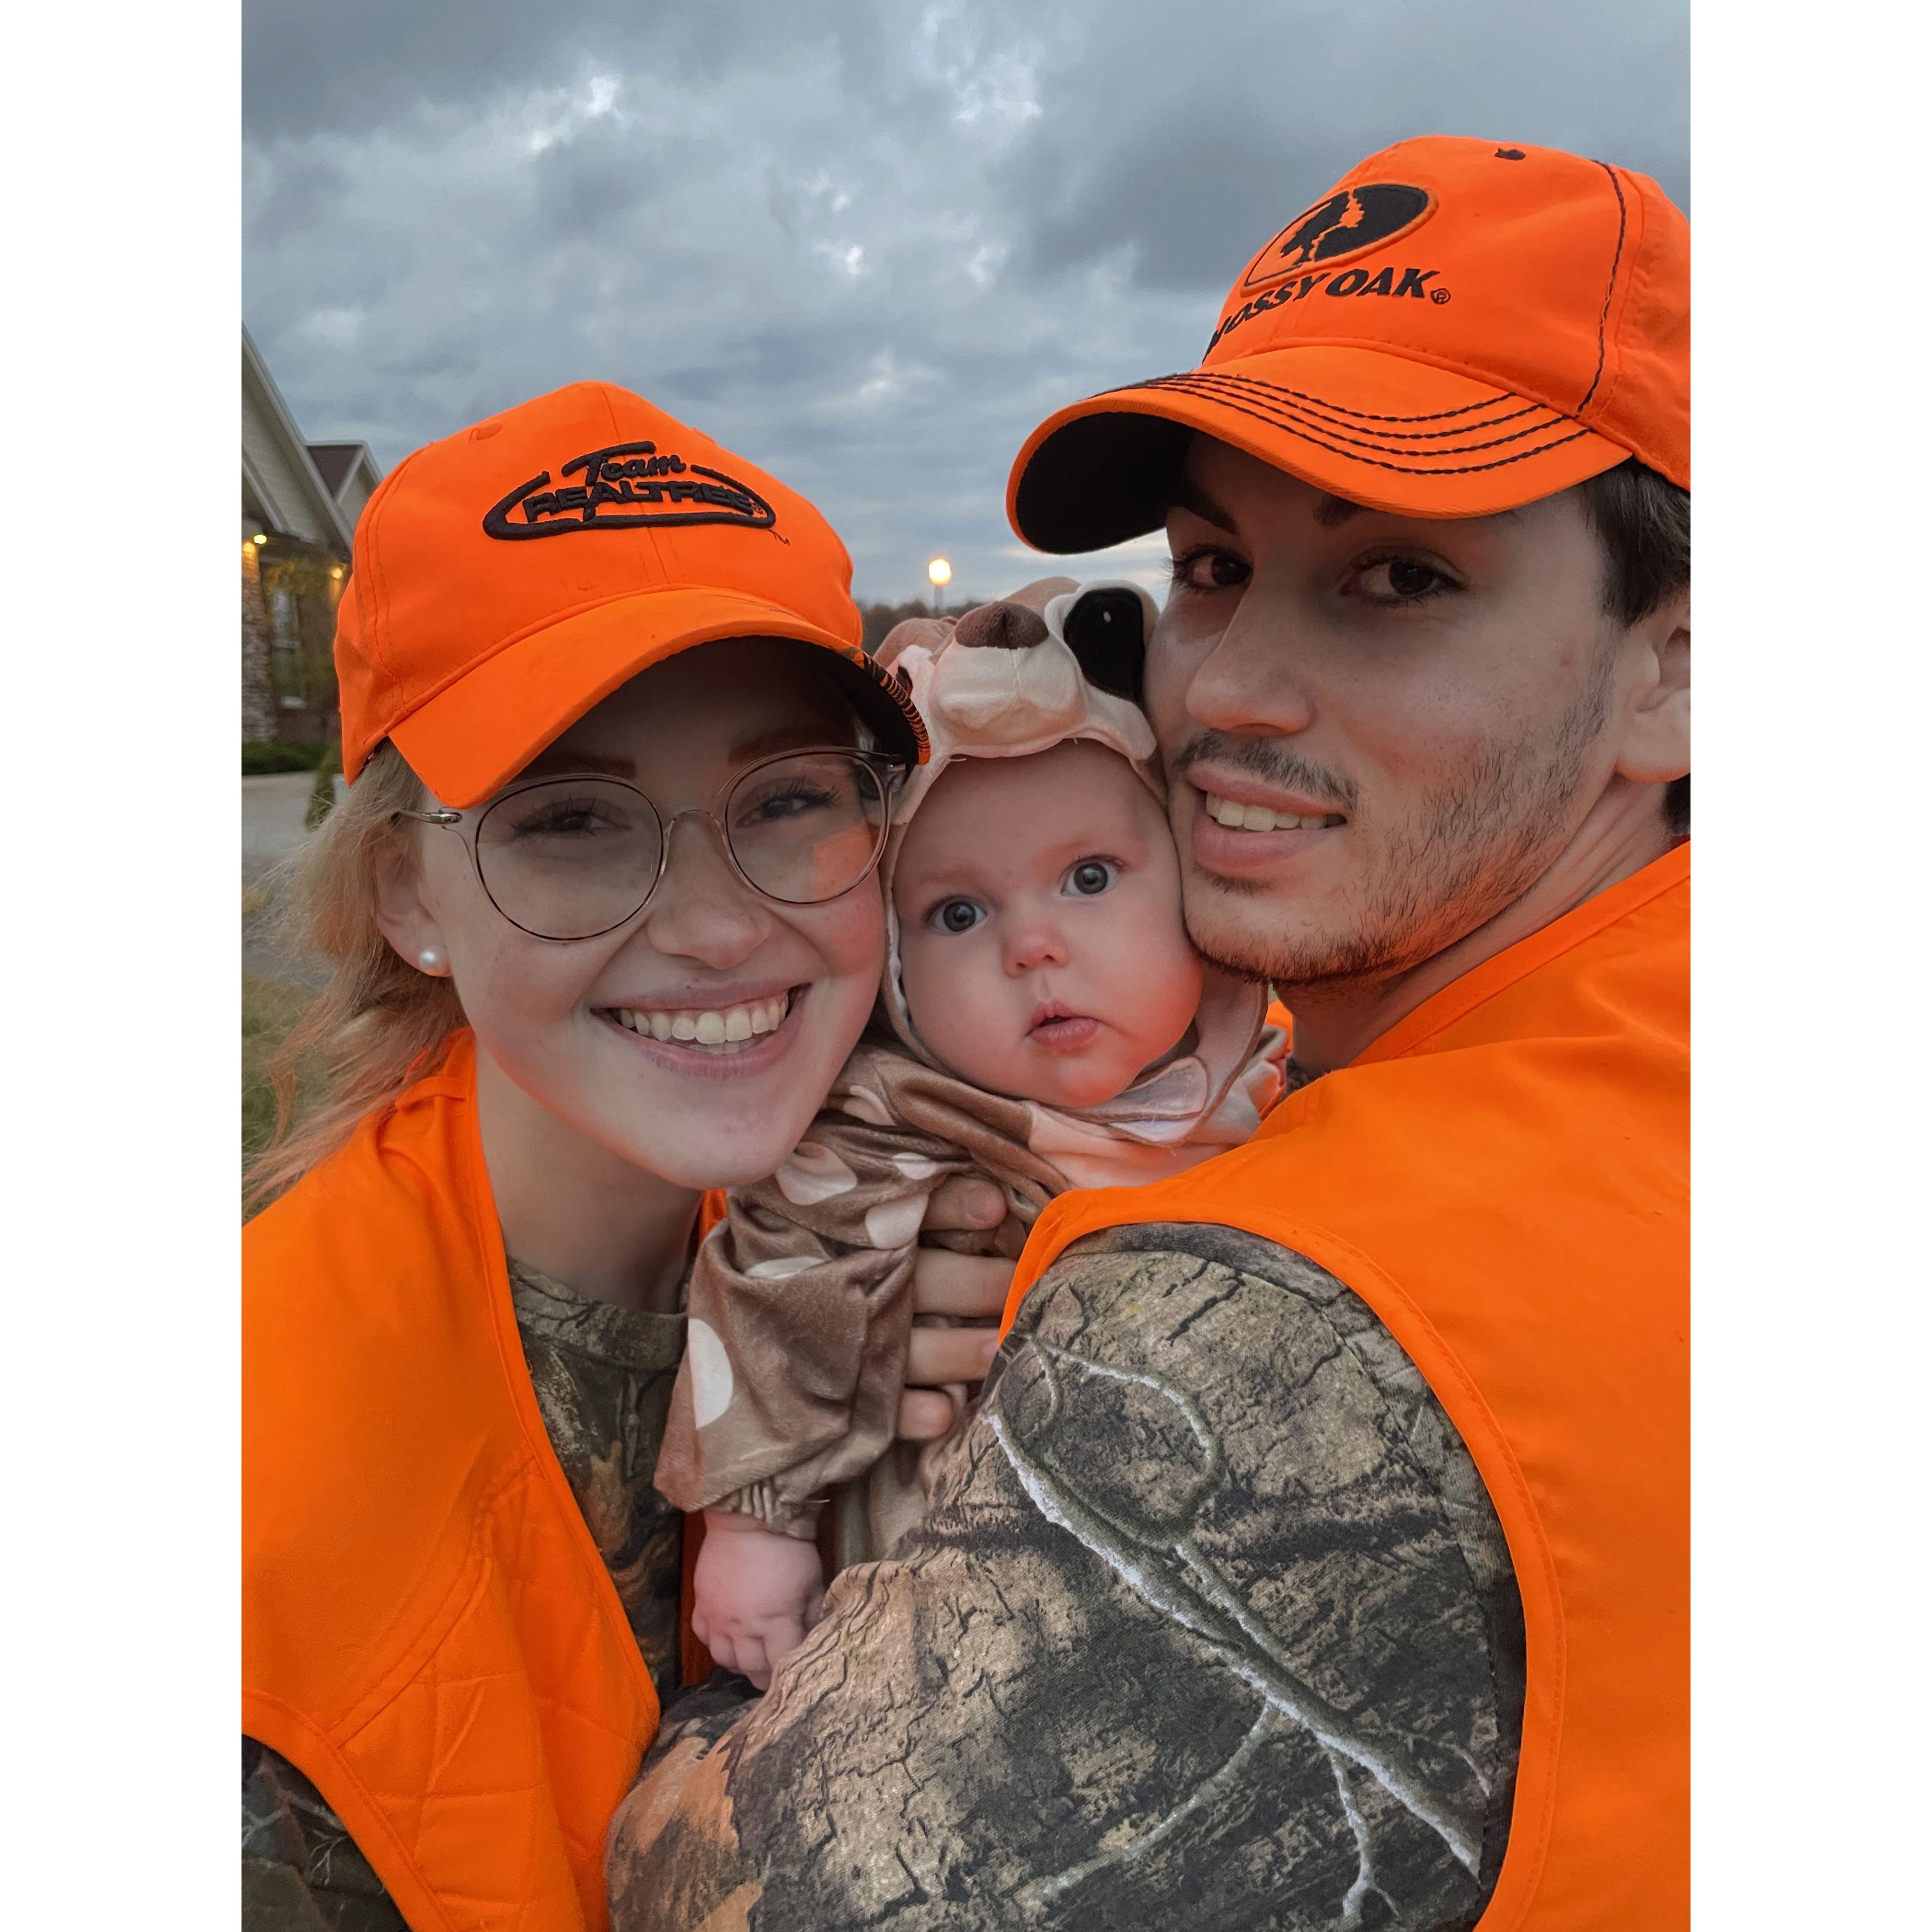 Our first halloween as a little family